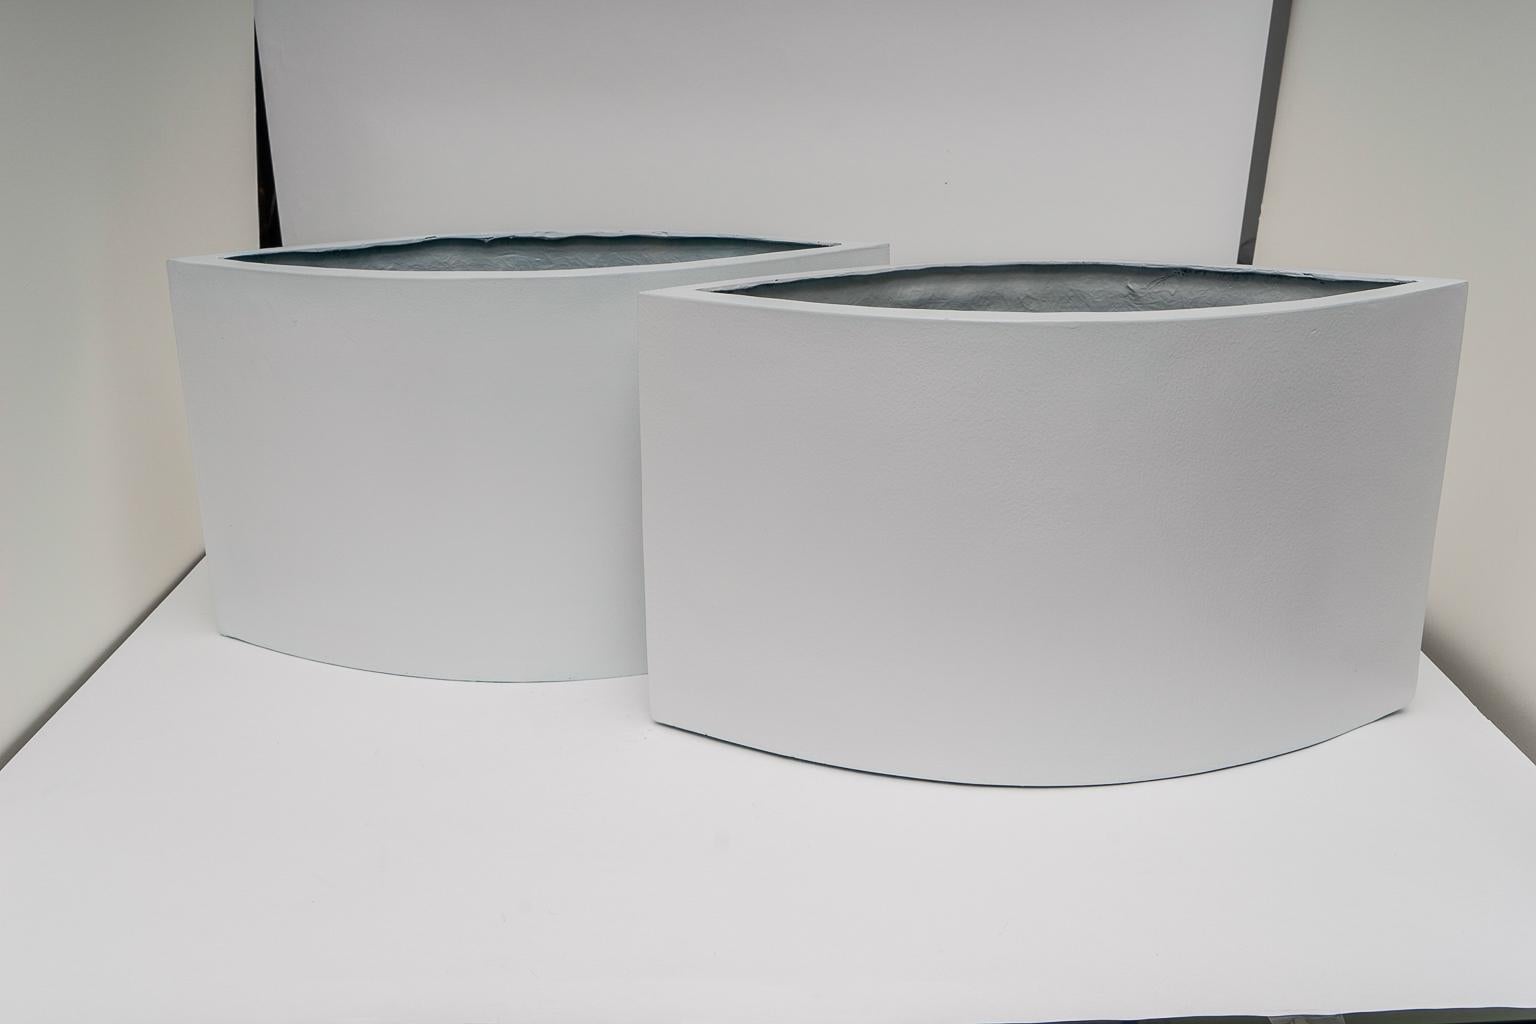 This stylish set of fiberglass planters were acquired from a South Beach (Miami, Florida) estate and they will make a statement with their clean-lines and simple form.

Note: They have drainage holes in the bottom.